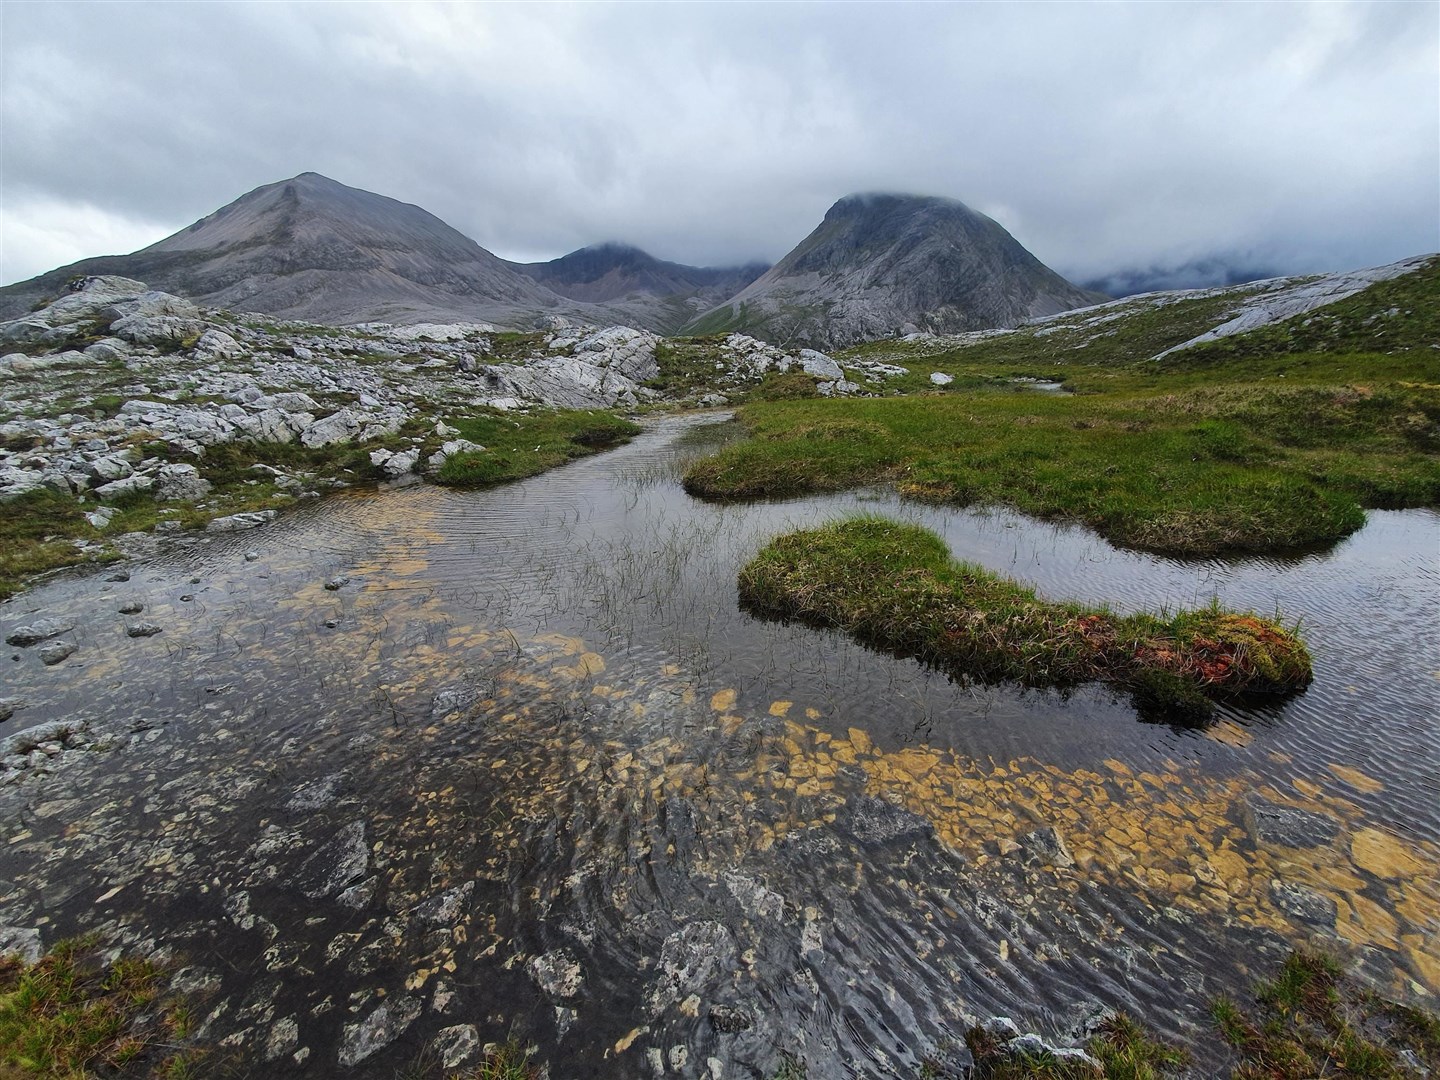 Second place went ti Rachel Drummond's Pony Path pools on Beinn Eighe.